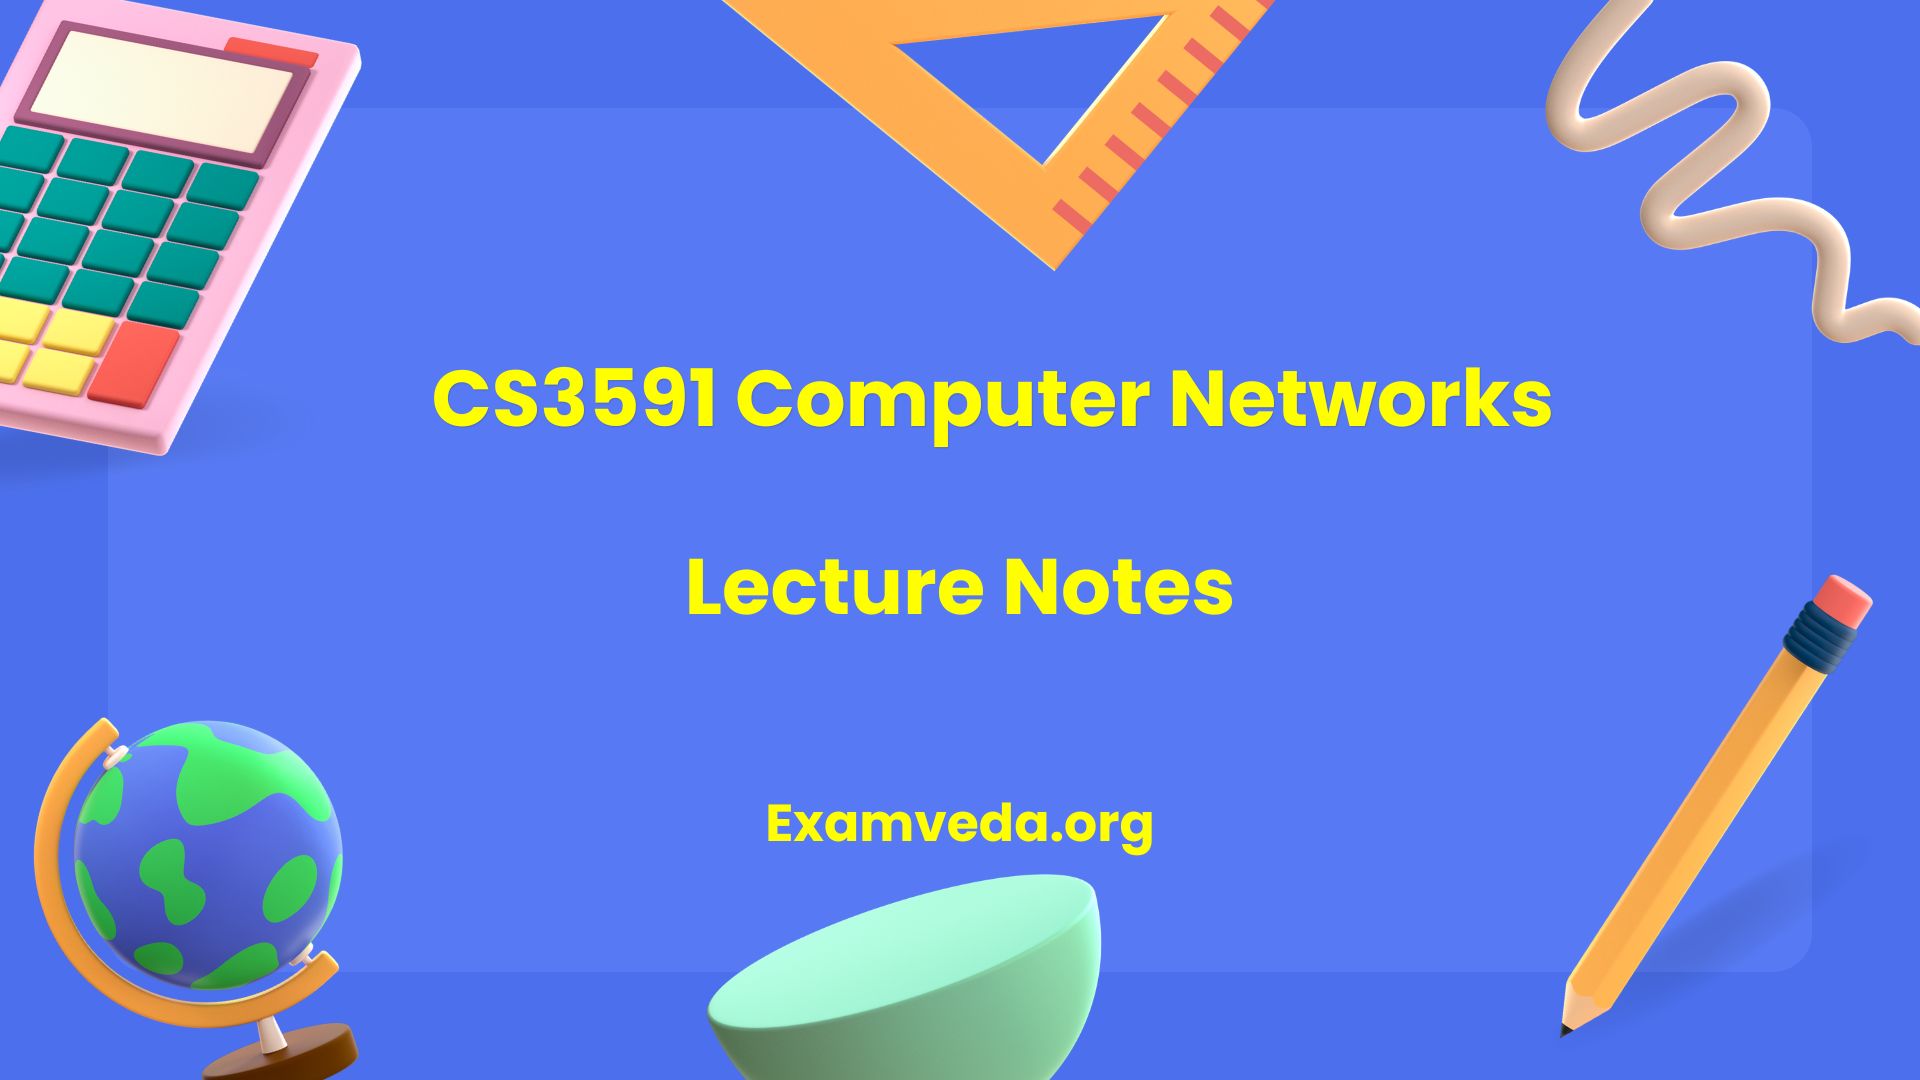 CS3591 Computer Networks Lecture Notes